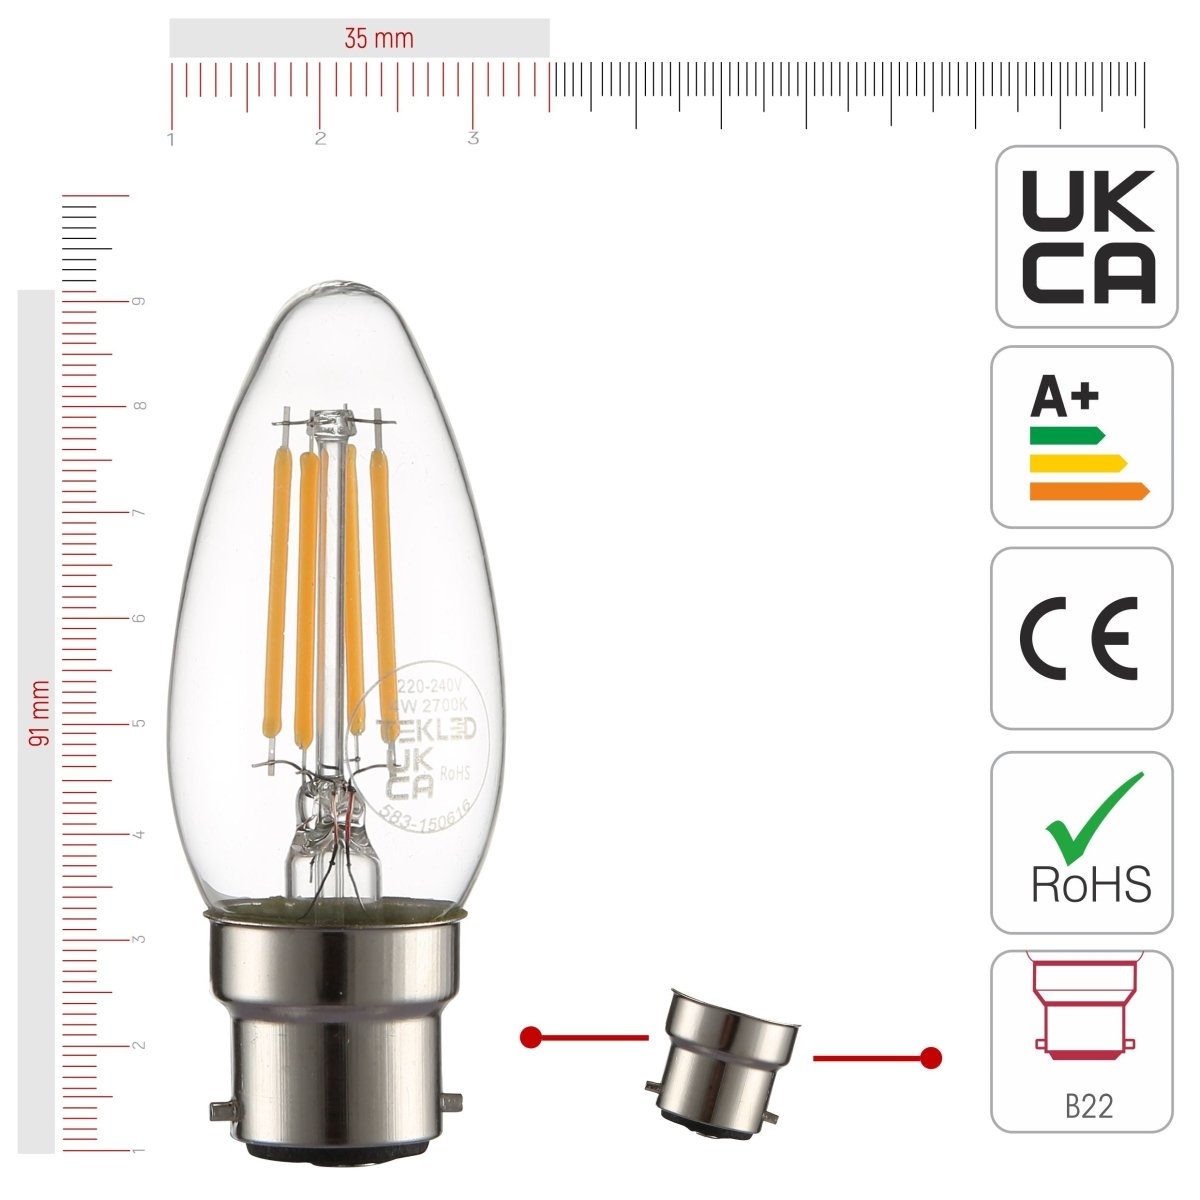 Size and certifications of LED Filament Bulb C35 Candle B22 Bayonet Cap 4W 470lm Warm White 2700K Clear Pack of 6 | TEKLED 583-150616